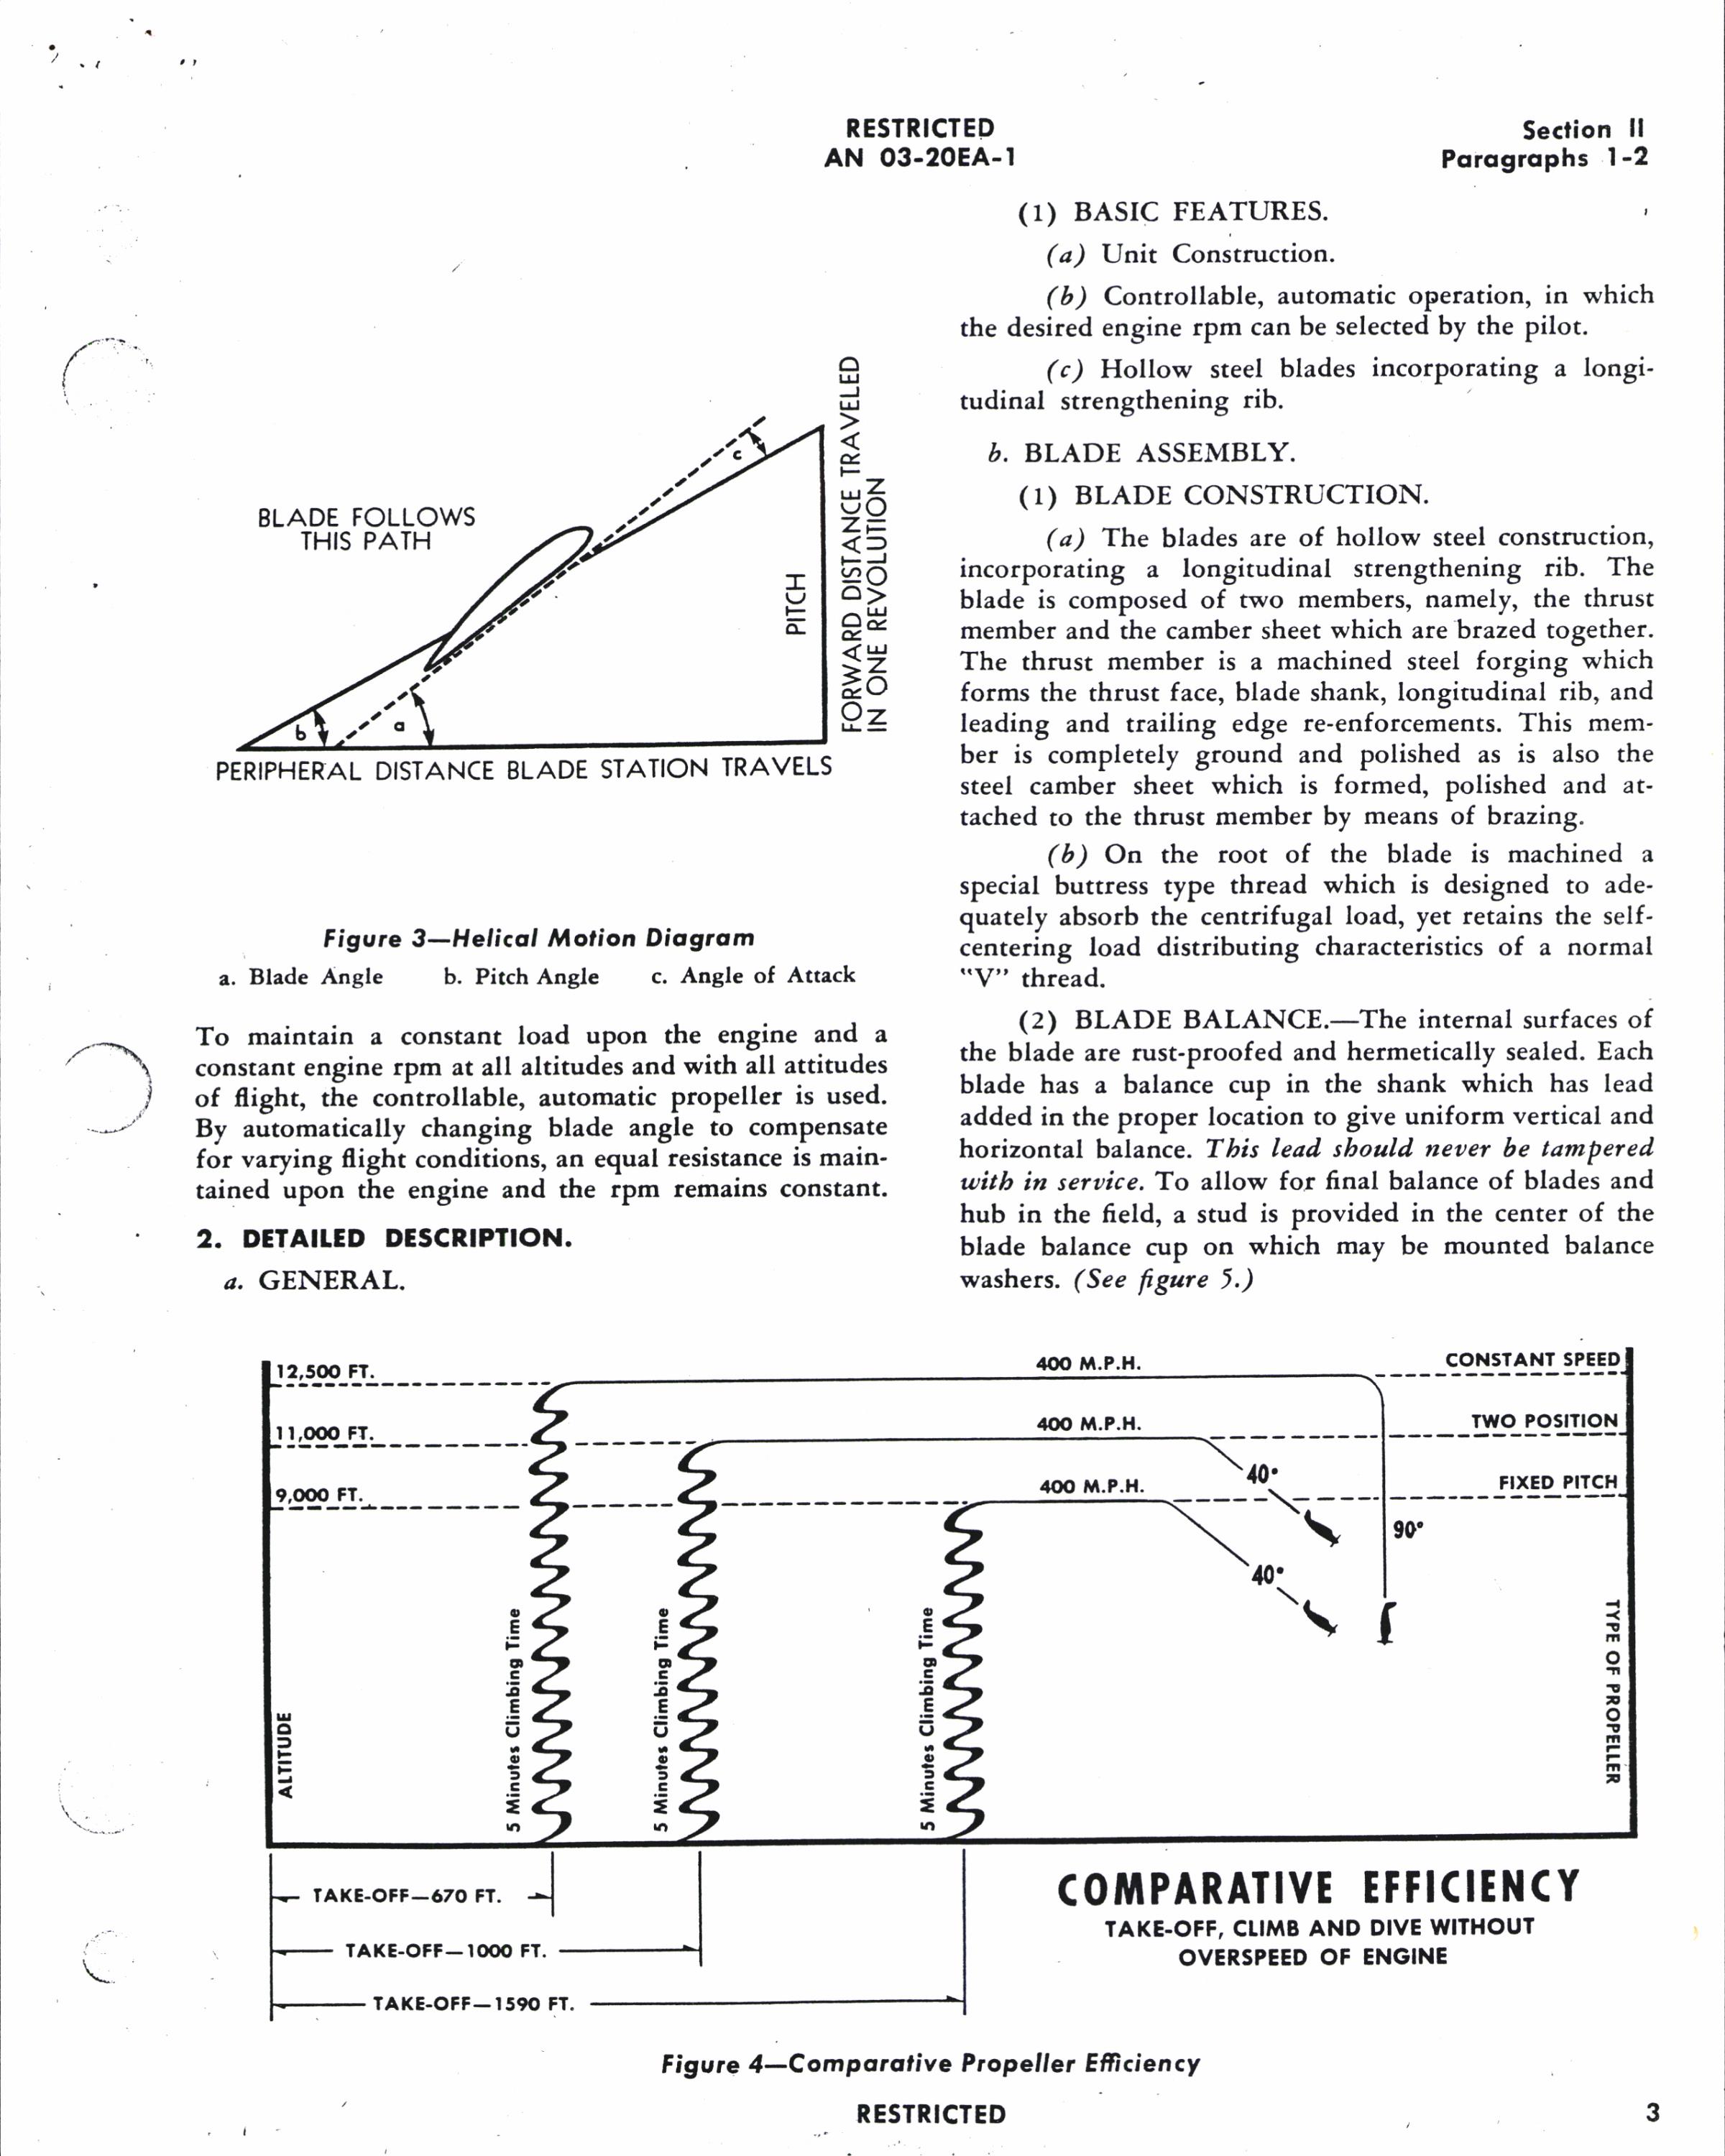 Sample page 7 from AirCorps Library document: Handbook of Instructions with Parts Catalog for Model A542-A1 Constant Speed Propeller